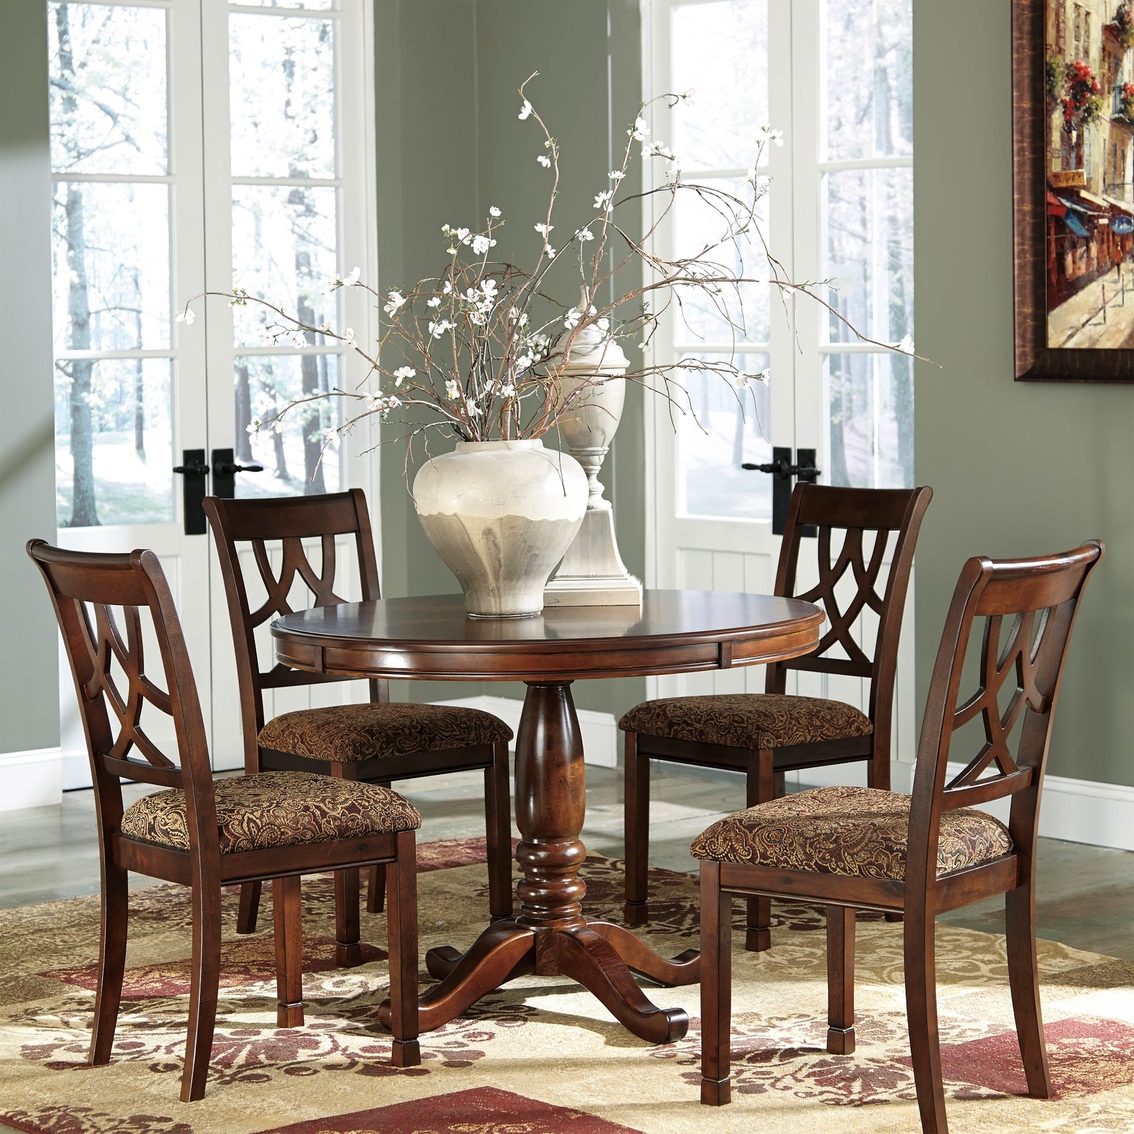 Signature Design by Ashley Leahlyn Dining Room Chair 2 Pk. - Image 2 of 3